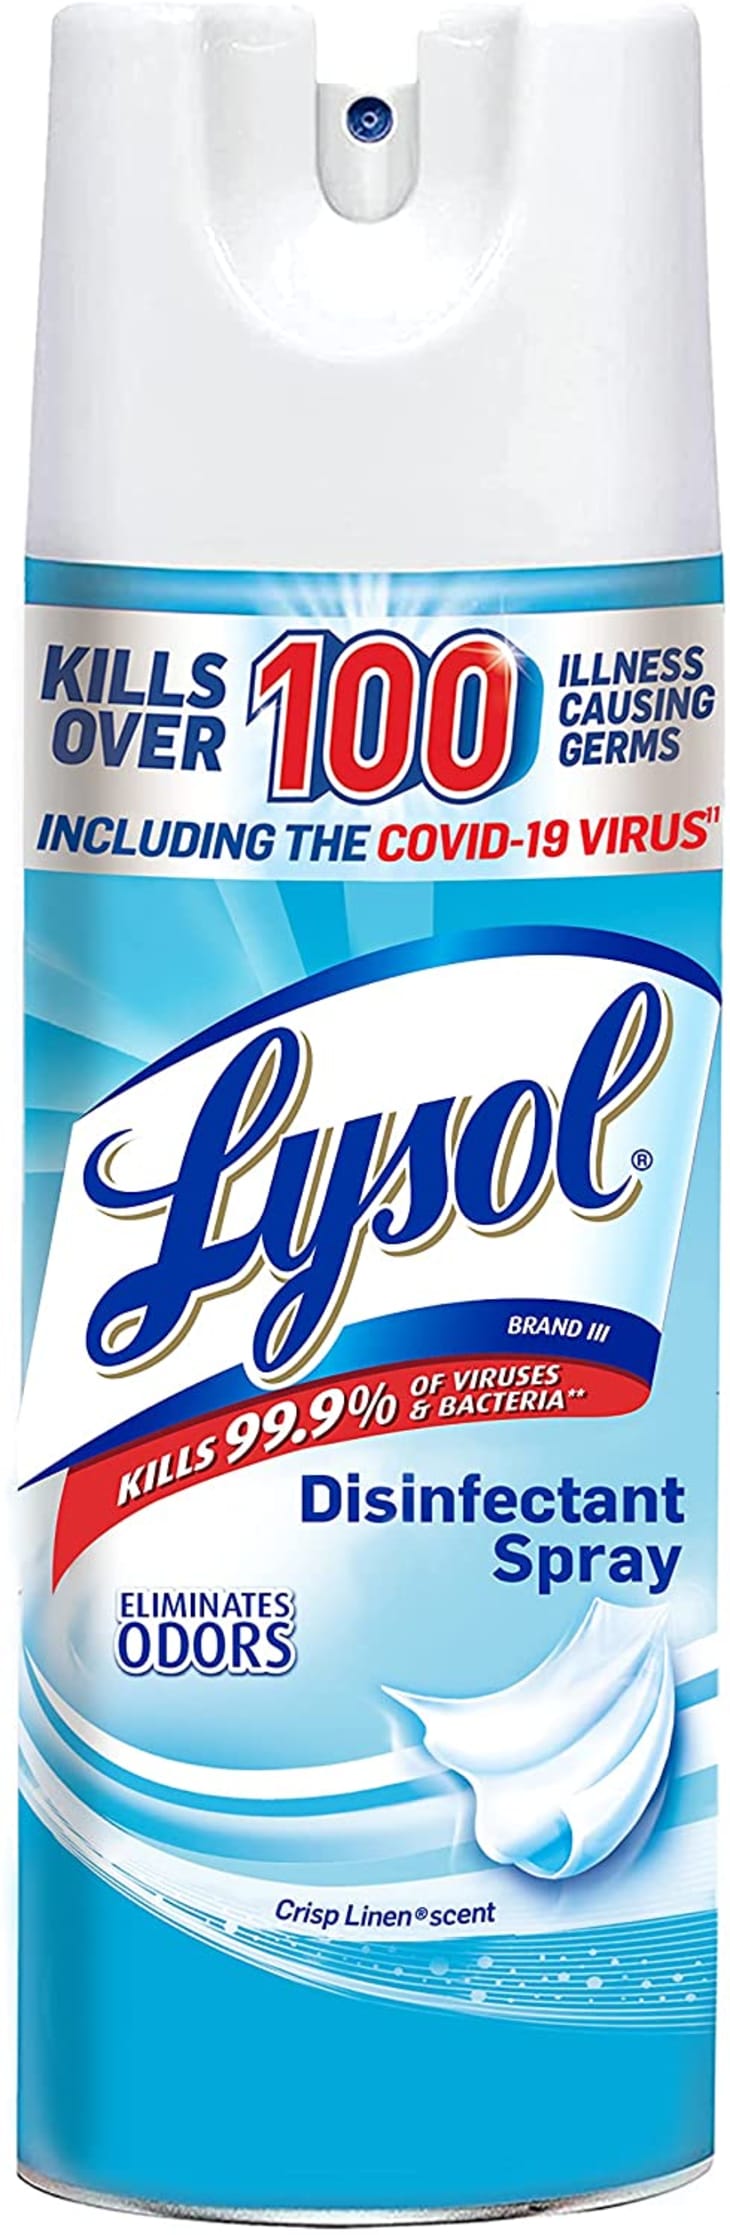 Lysol Disinfectant Spray, Sanitizing and Antibacterial Spray at Amazon